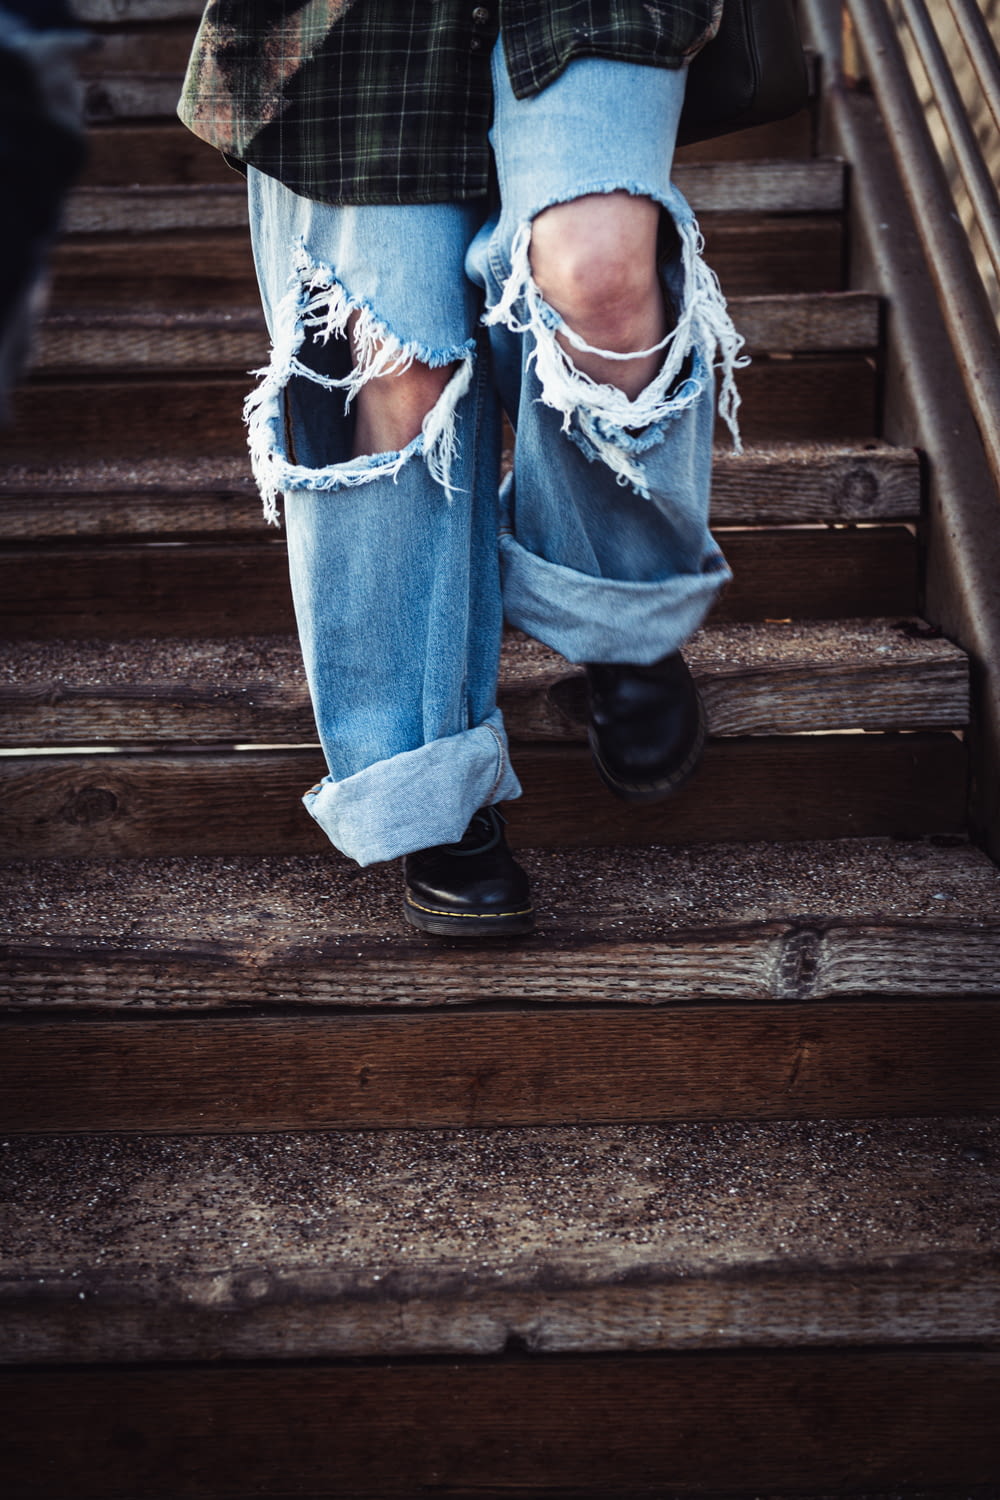 a person's legs in jeans and a blue shirt on a wooden staircase